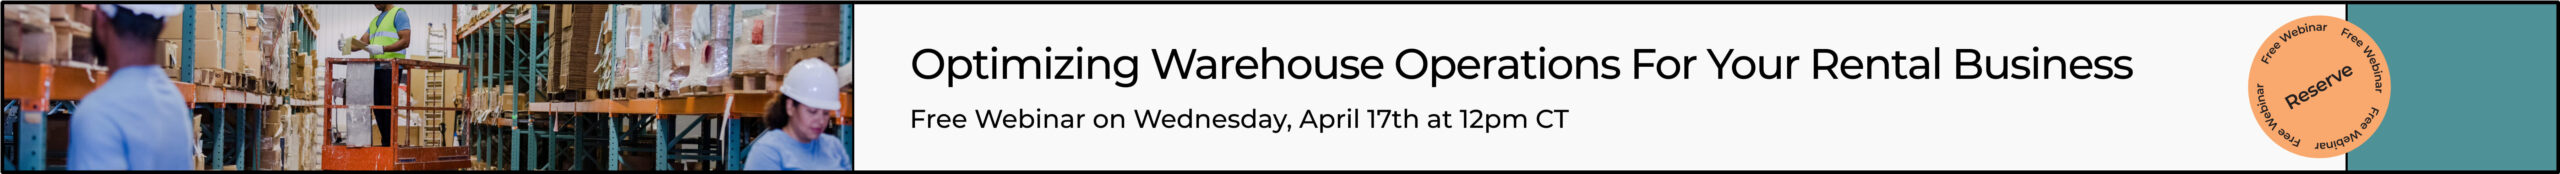 Optimizing Warehouse Operations For Your Rental Business - Free Webinar